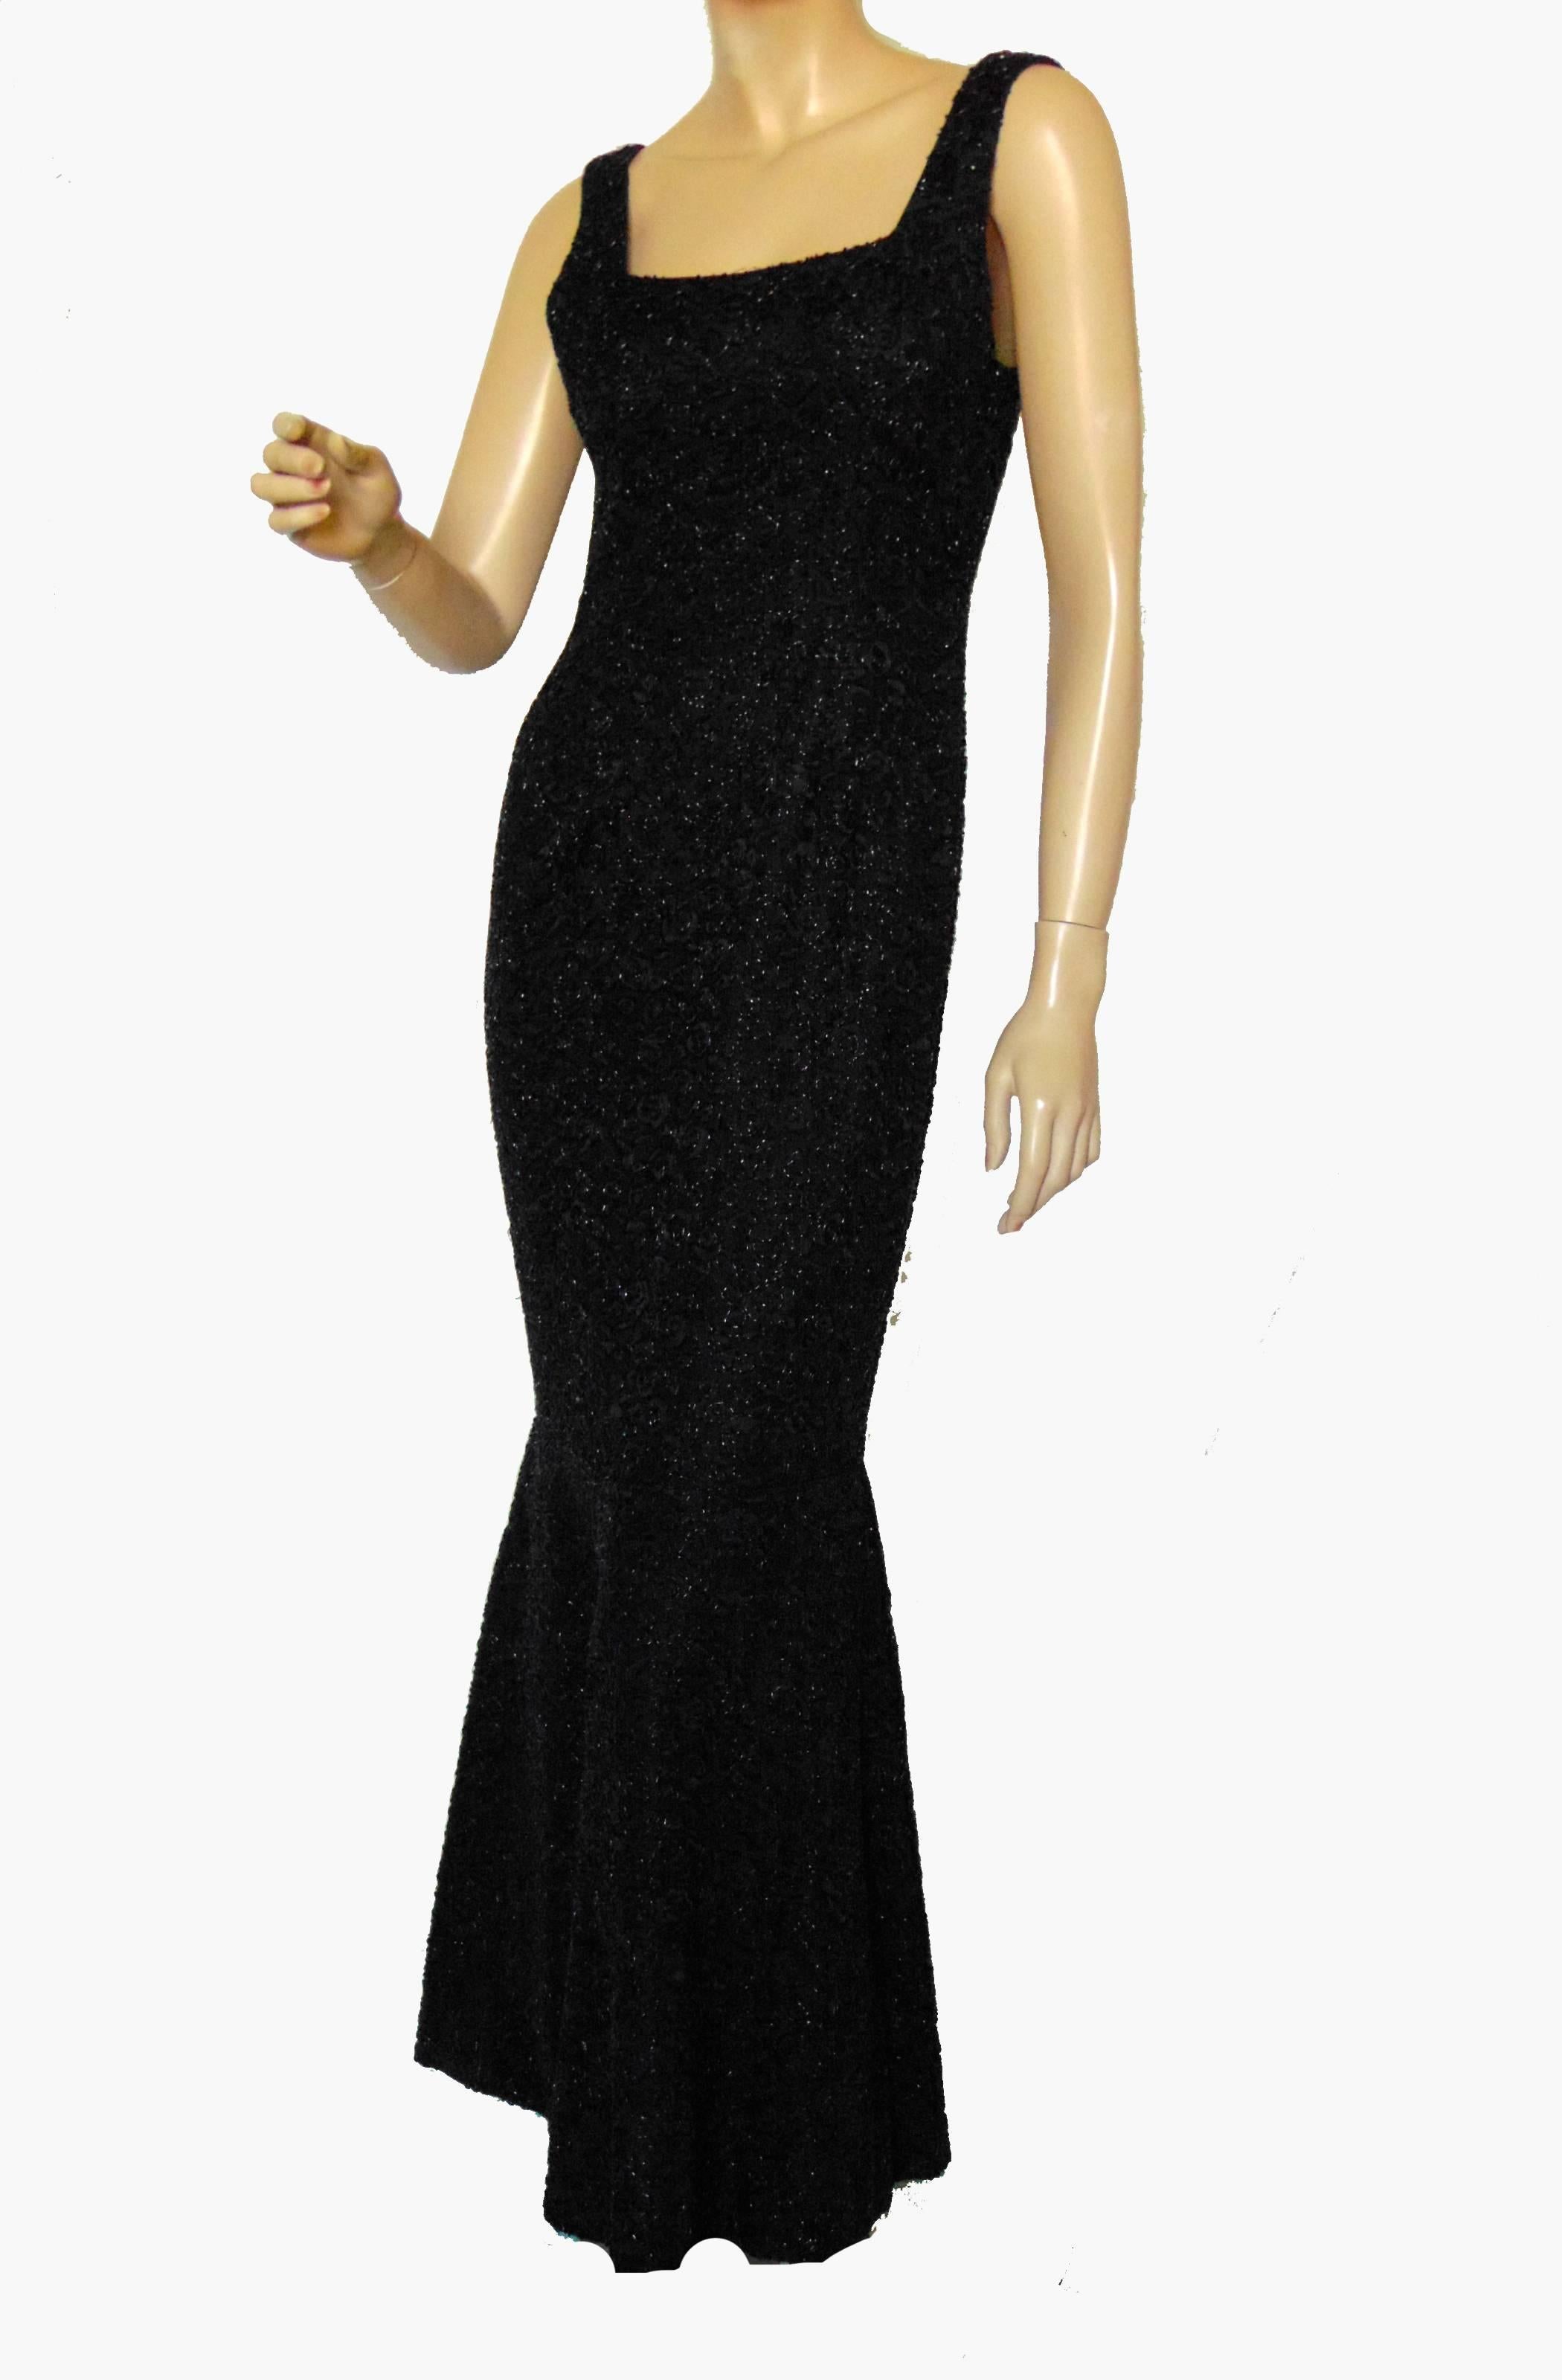 This fabulous evening gown was likely made in the 1960s and is made from a substantial floral brocade fabric with tons of black bugle beads throughout.  The mermaid silhouette is so chic, and the weight of the fabric is perfect for movement through